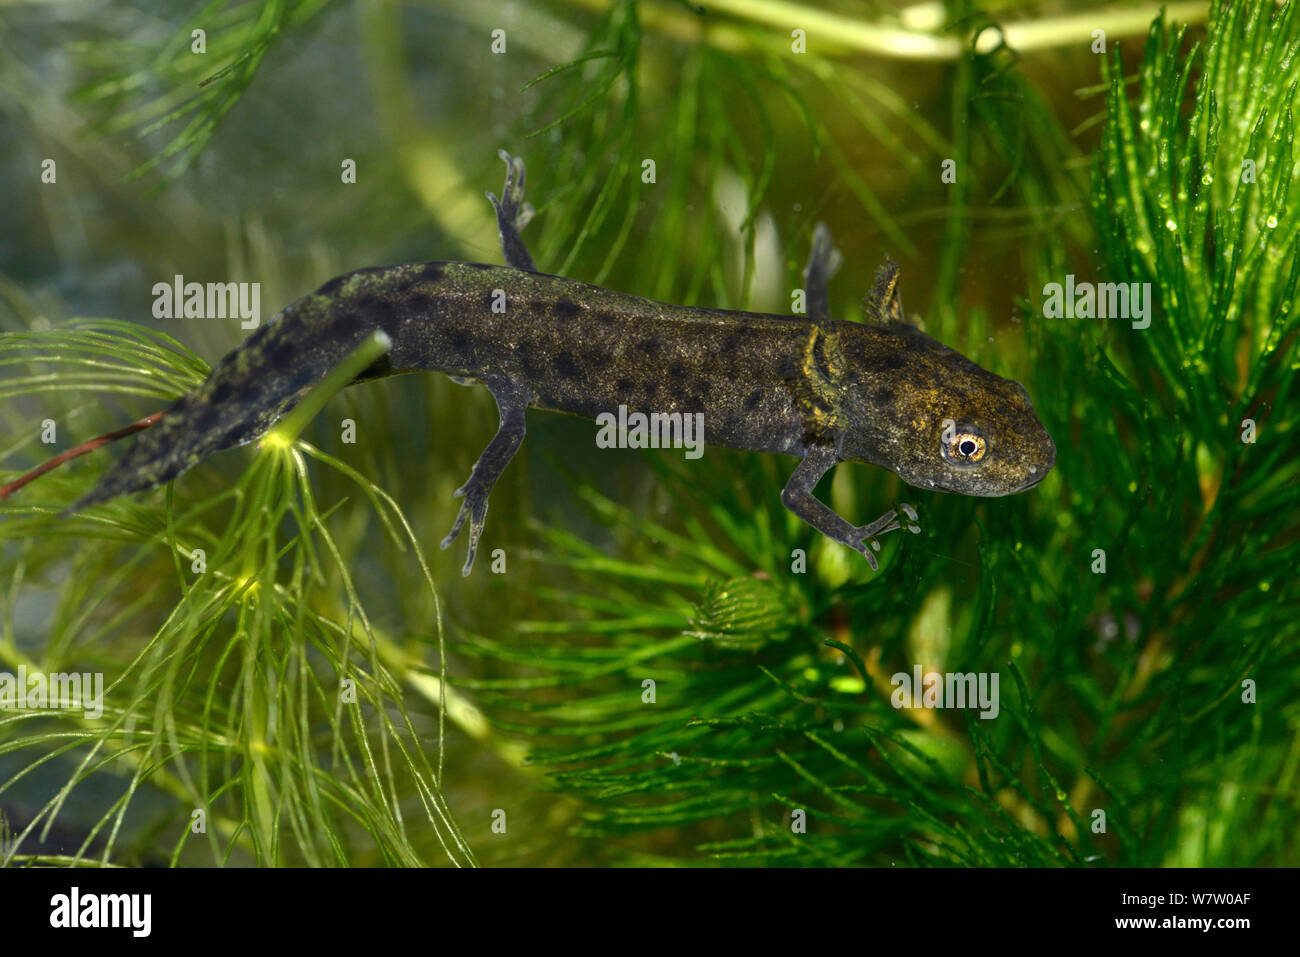 Great Crested Newt (Triturus cristatus) tadpole at late developmental stage, in captivity, Herefordshire, England. Stock Photo